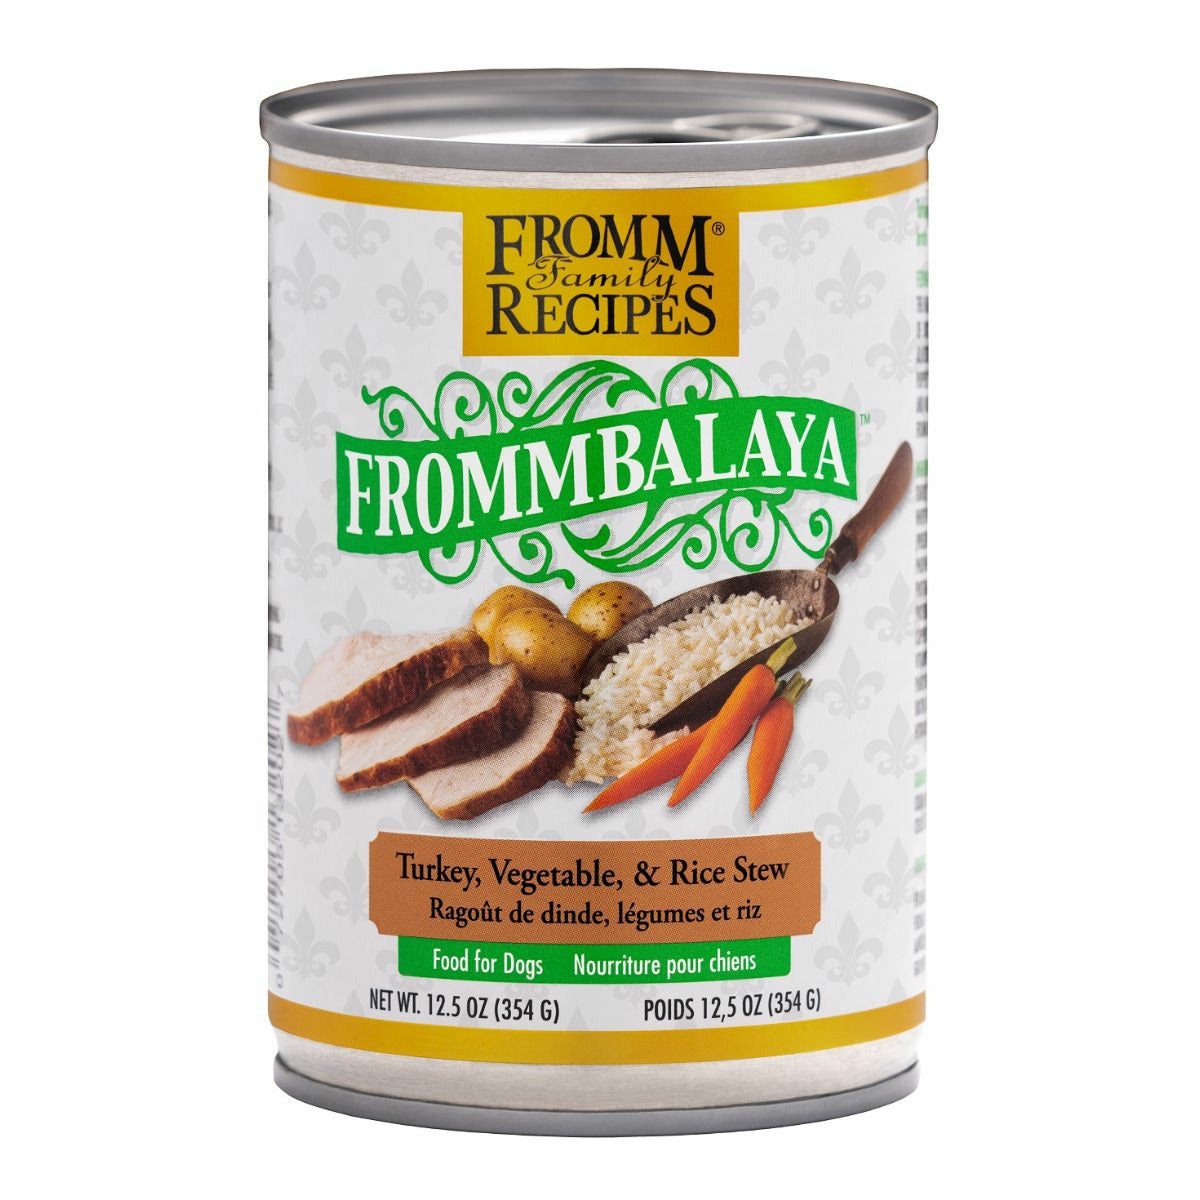 Frommbalaya Canned Dog Food Turkey, Veg & Rice Stew  Canned Dog Food  | PetMax Canada